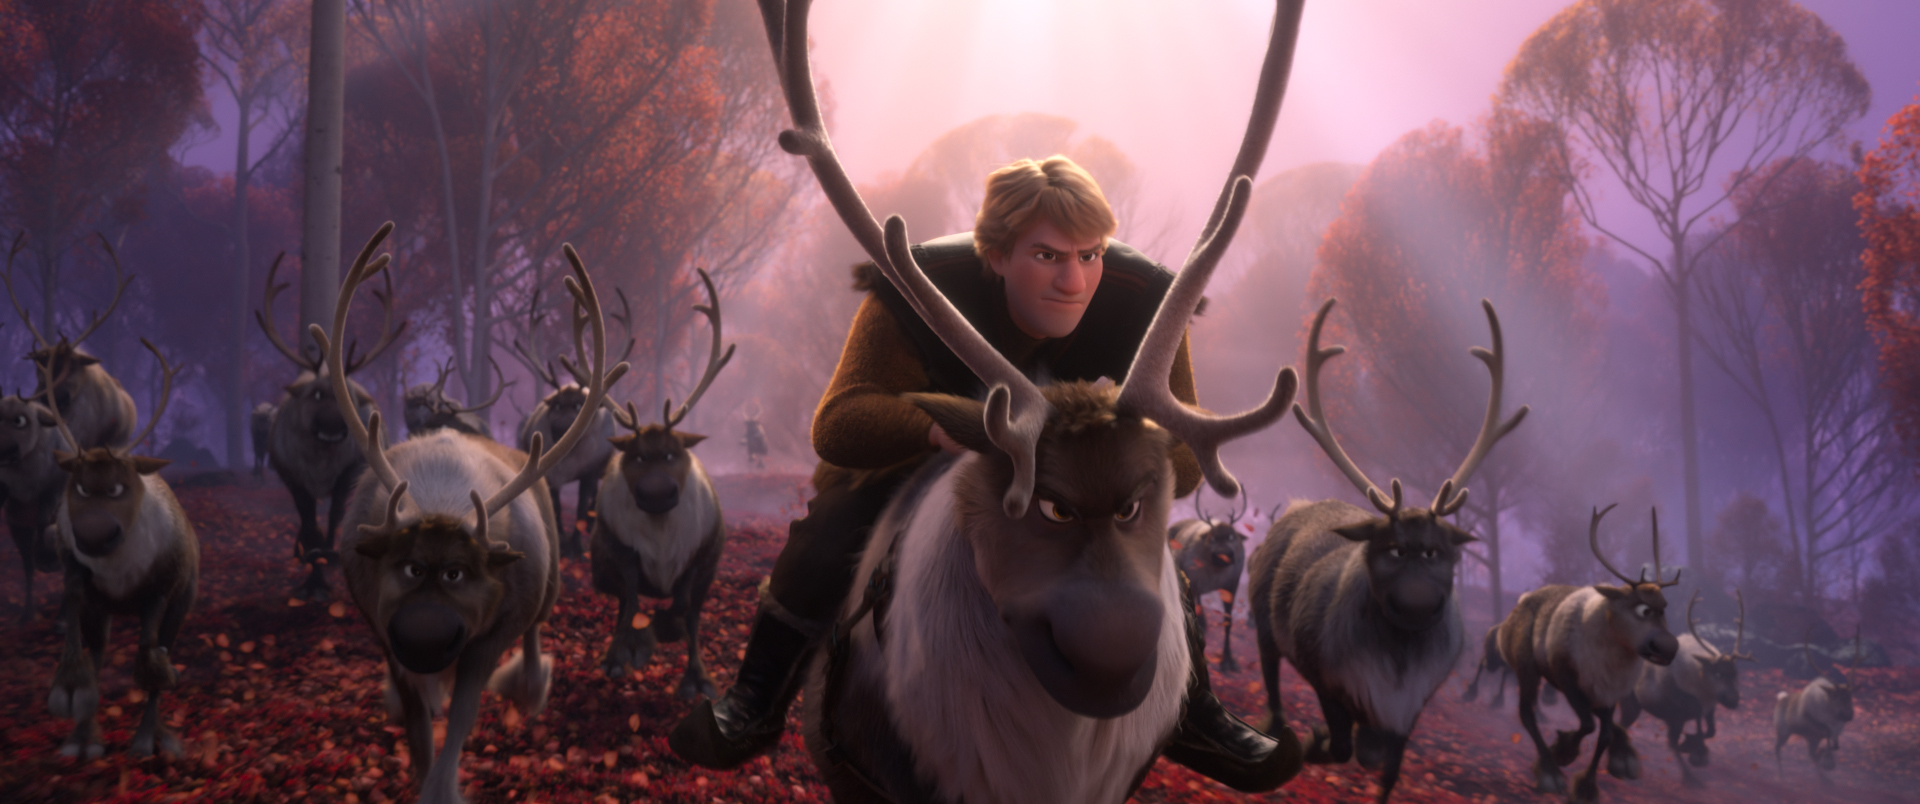 Jonathan Groff as Kristoff and Sven in Frozen 2